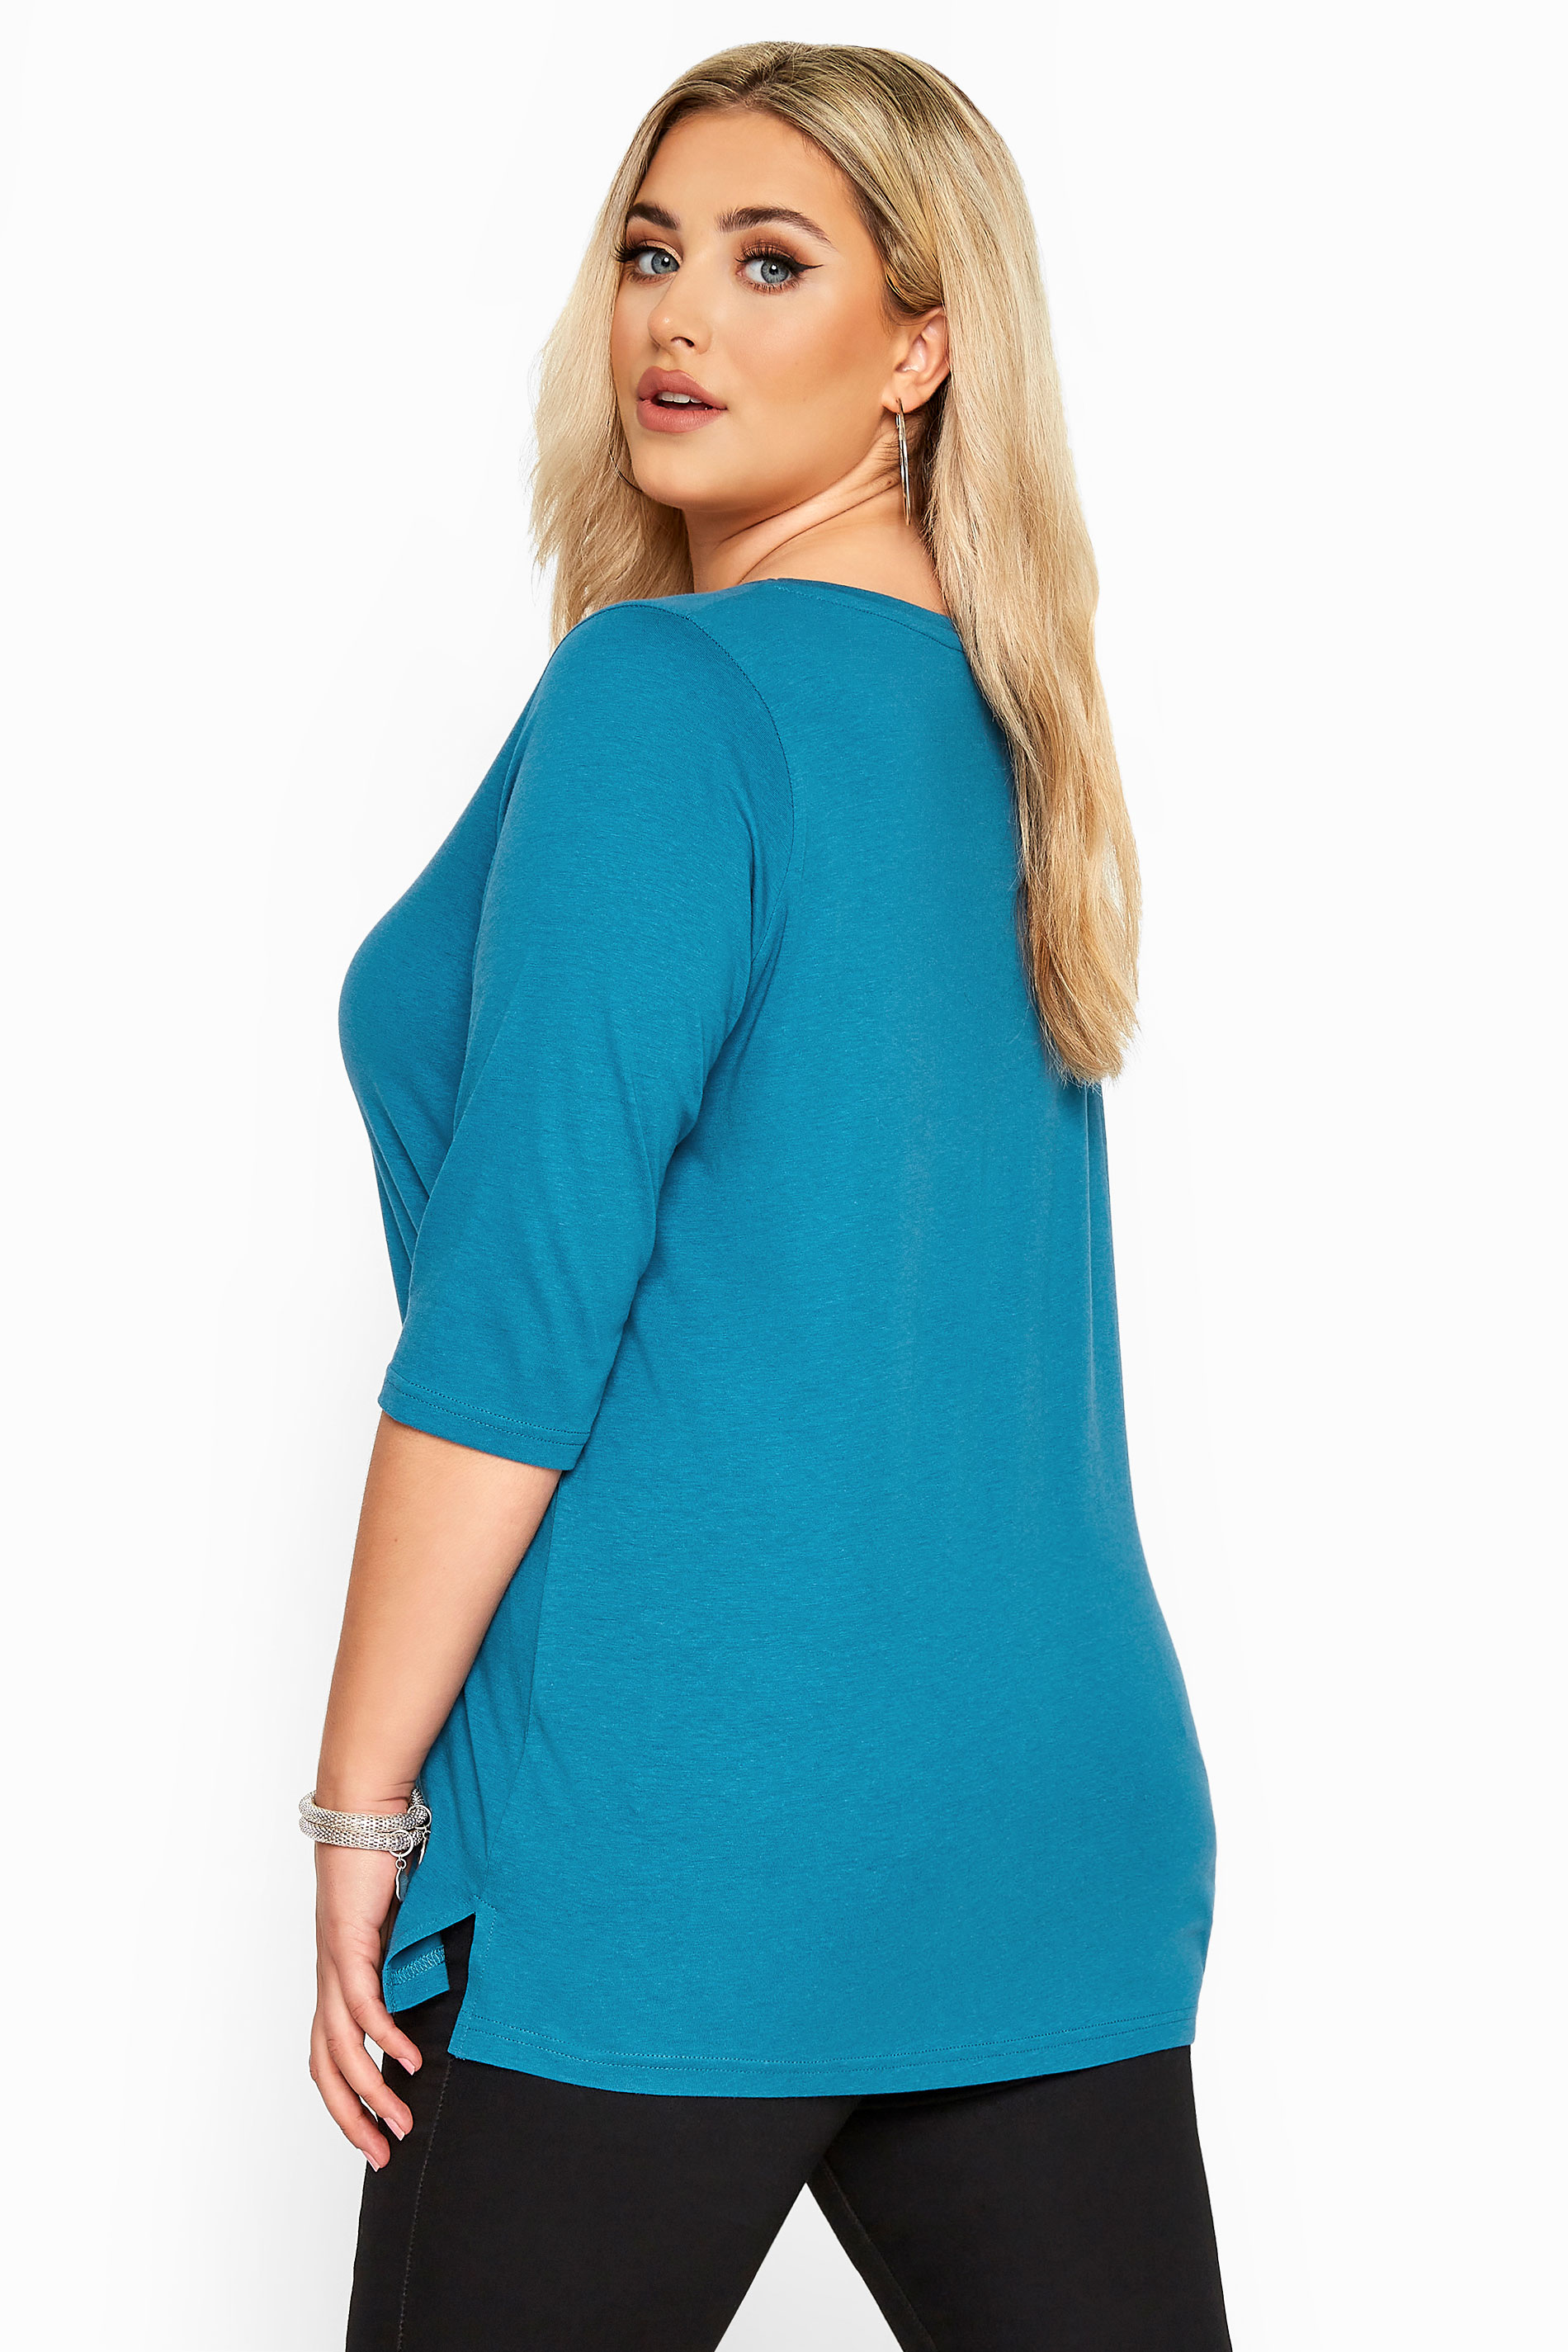 Teal Blue V-Neck Cotton Top | Yours Clothing